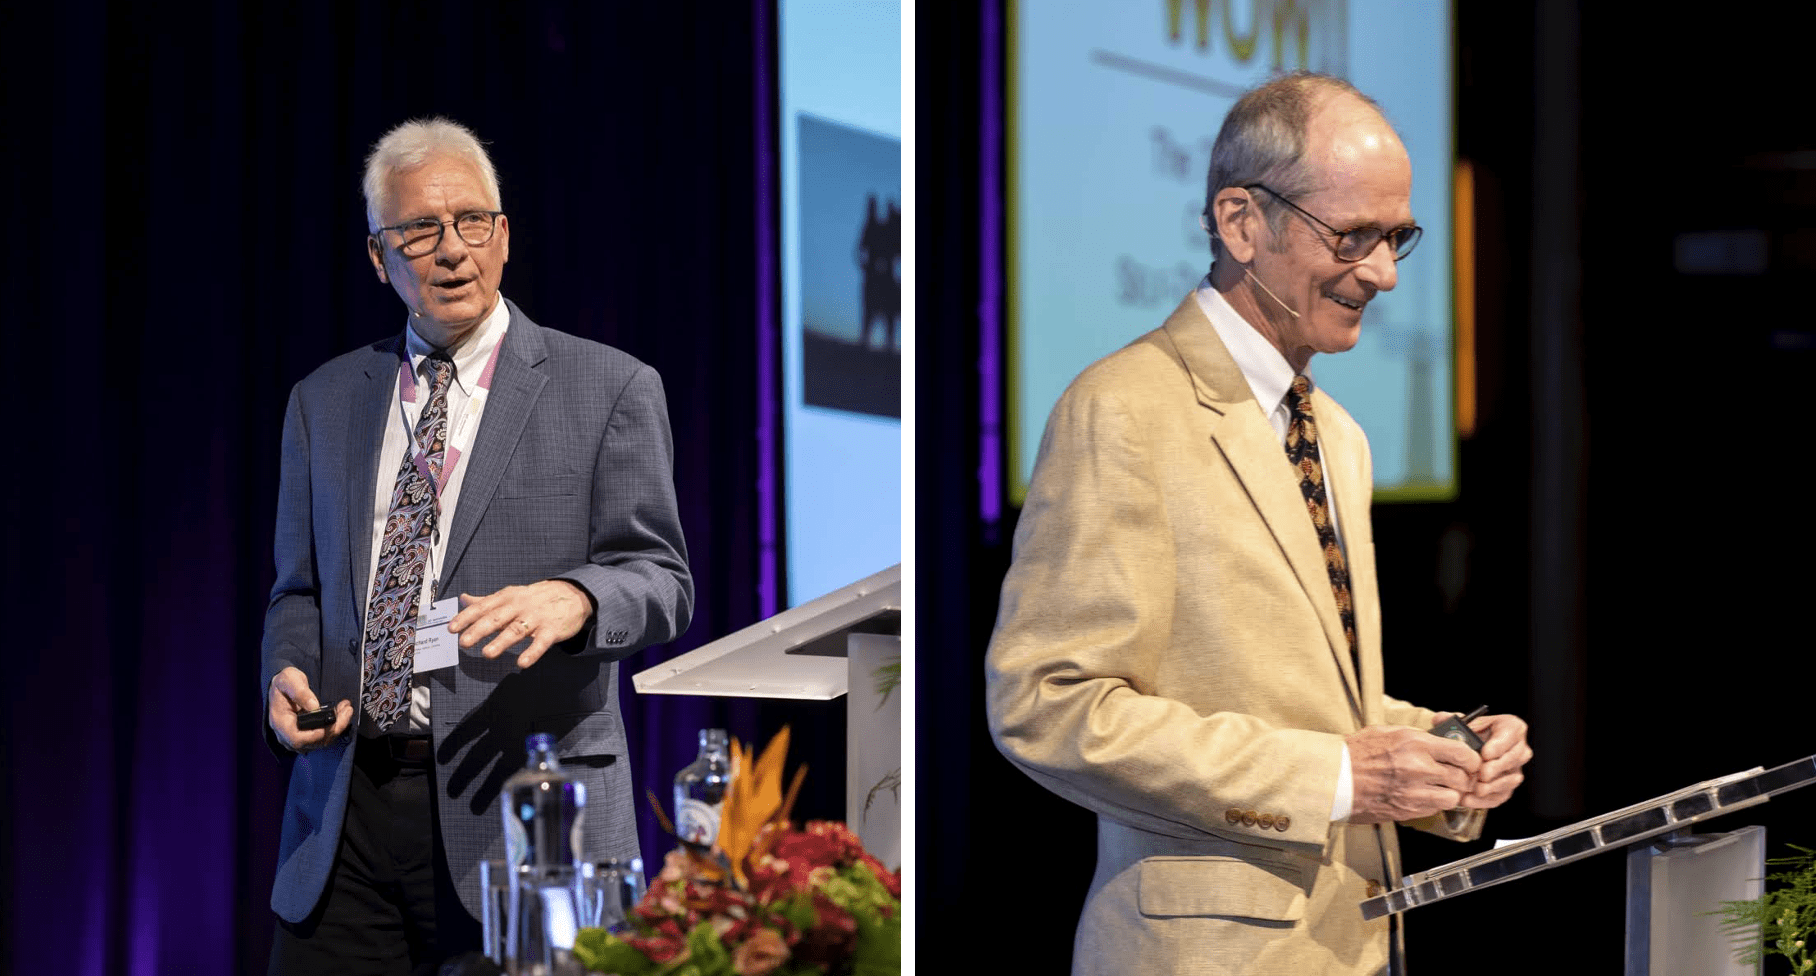 SelfDetermination Theory An Incomplete Overview in  100 Minutes Plenary Address by Richard Ryan and Edward Deci  SDT2019